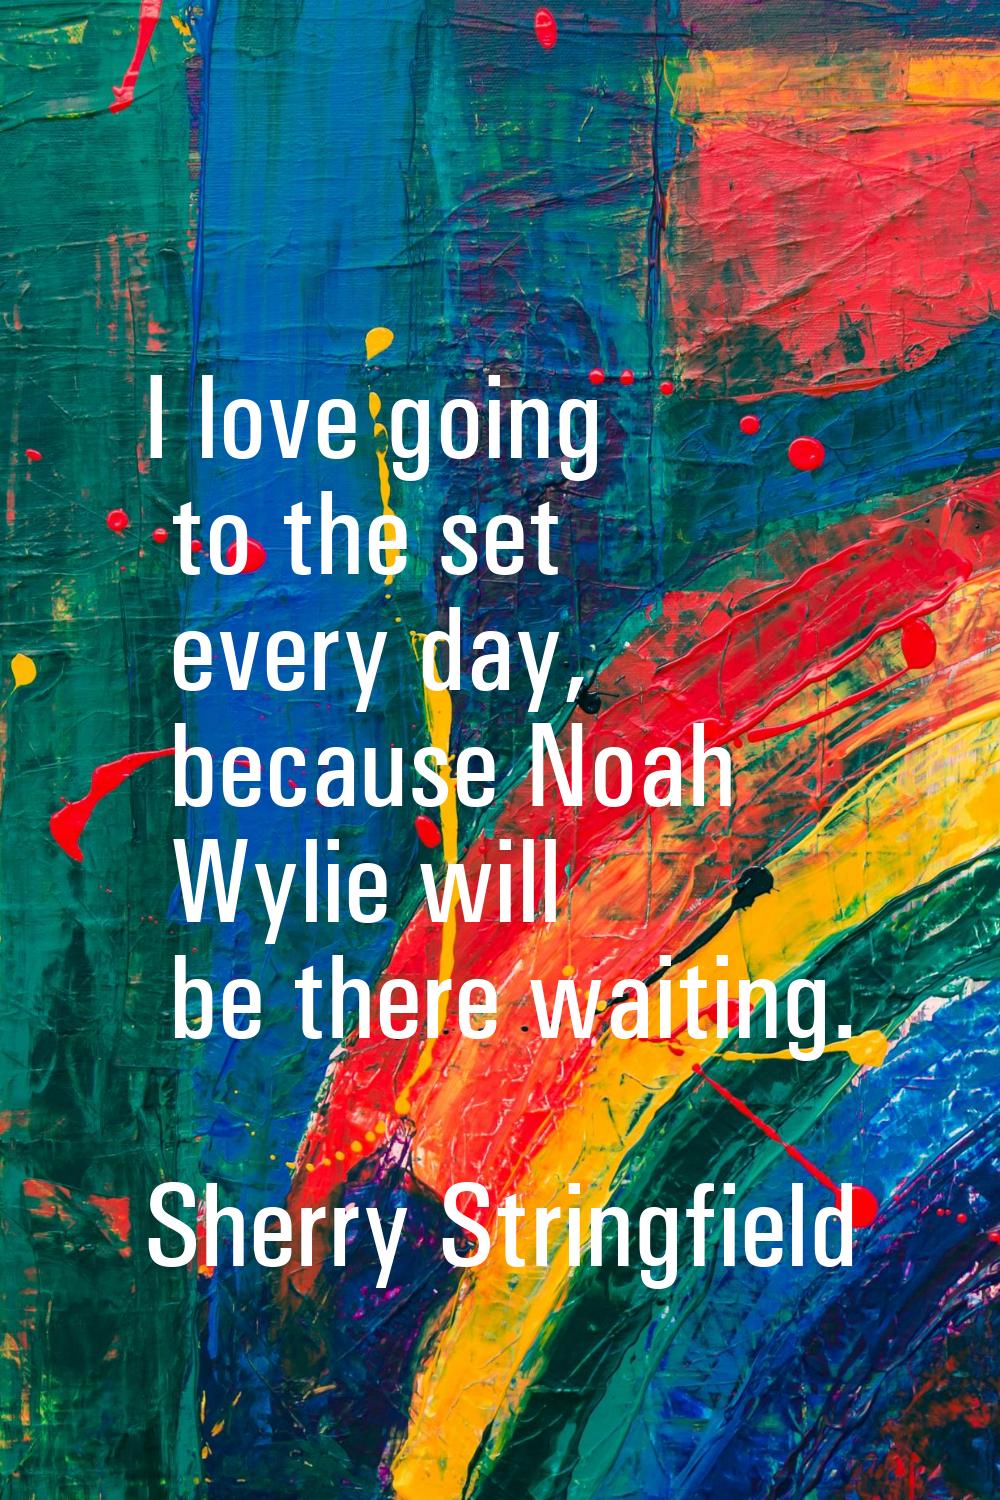 I love going to the set every day, because Noah Wylie will be there waiting.